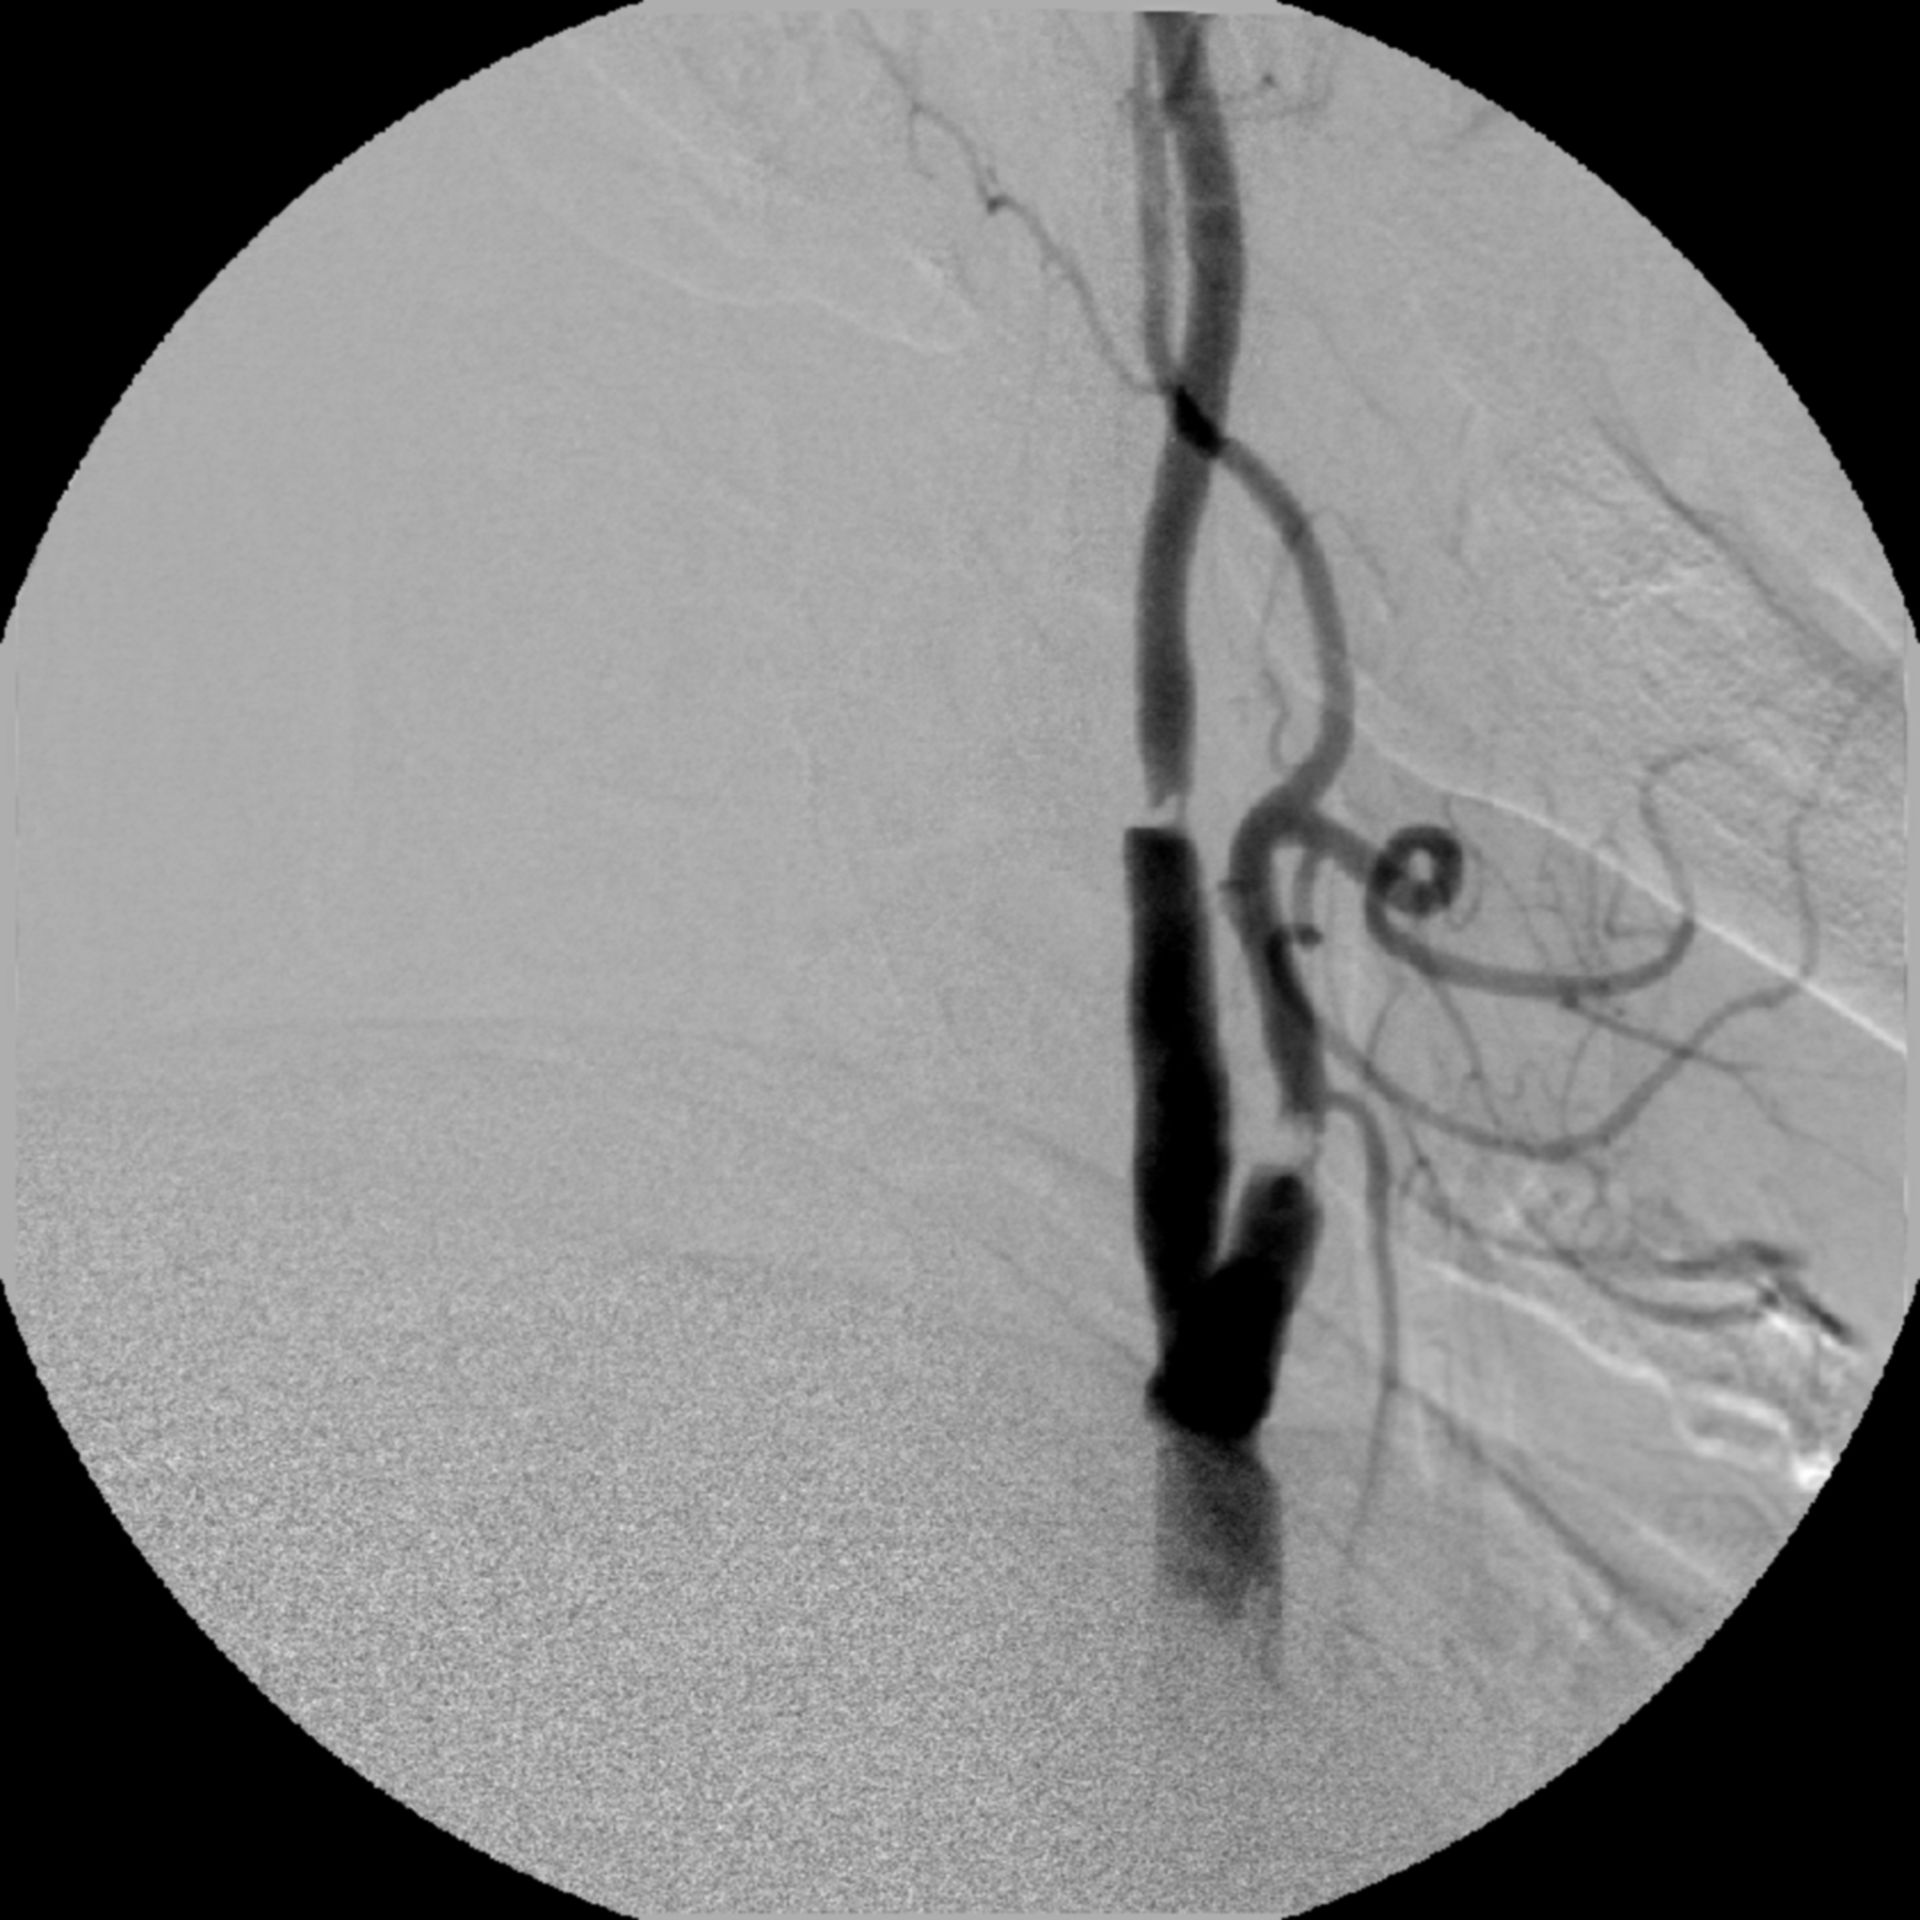 Early relapse due to intima flap after TEA of the carotid artery.